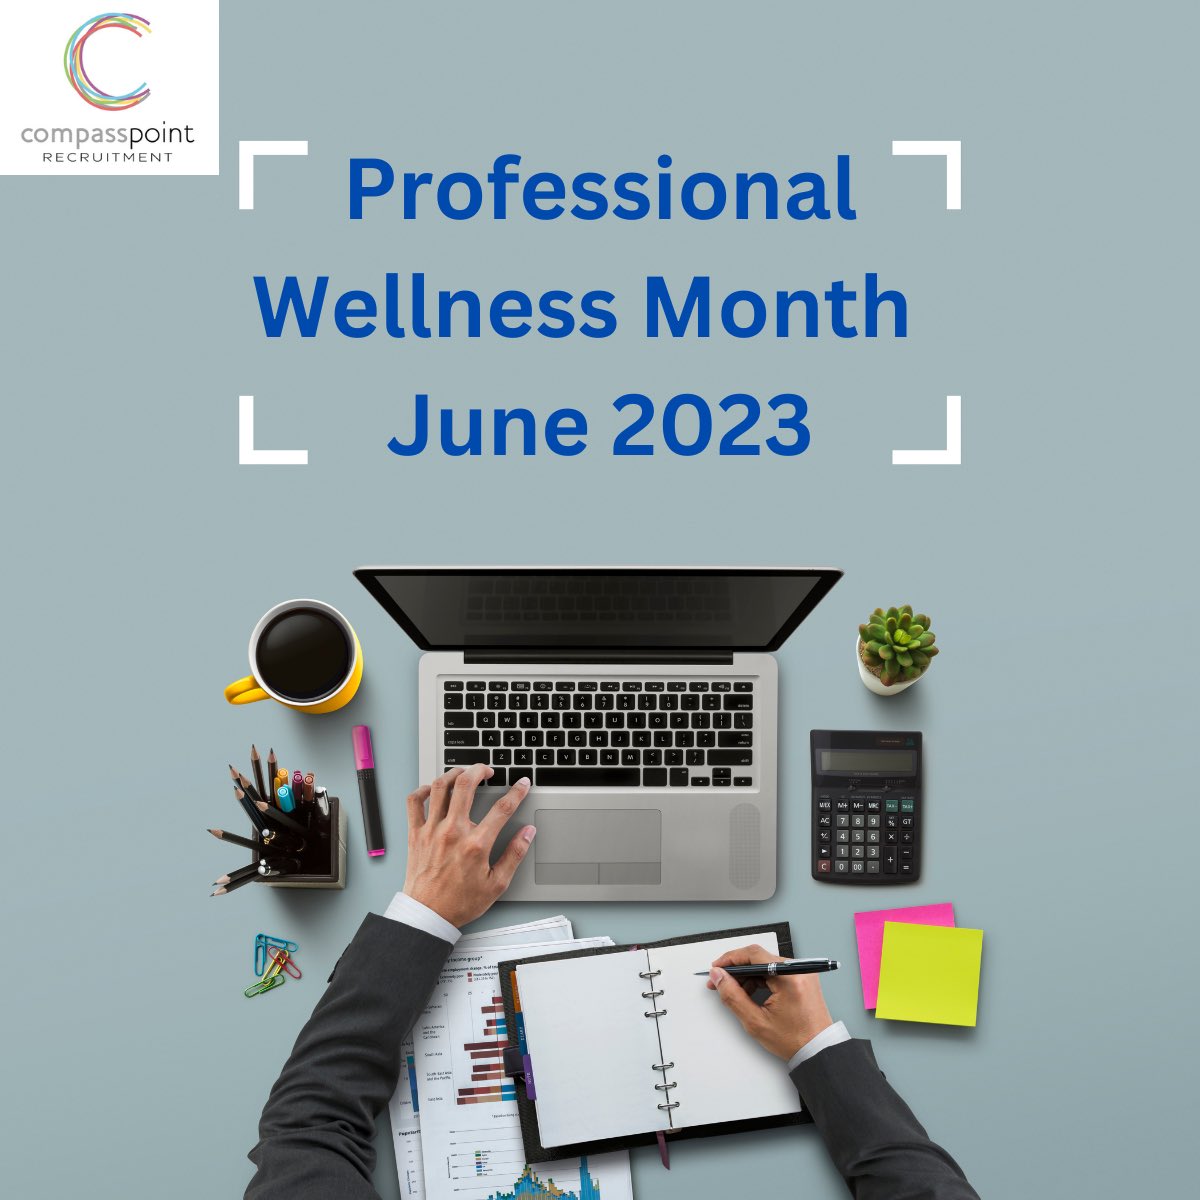 June is #ProfessionalWellnessMonth & #recruitment experts Compass Point Recruitment observe that many successful #businesses #focus on the physical & mental well-being of their #employees which in turn encourages individuals to prioritise their health & wellbeing #jobs #careers